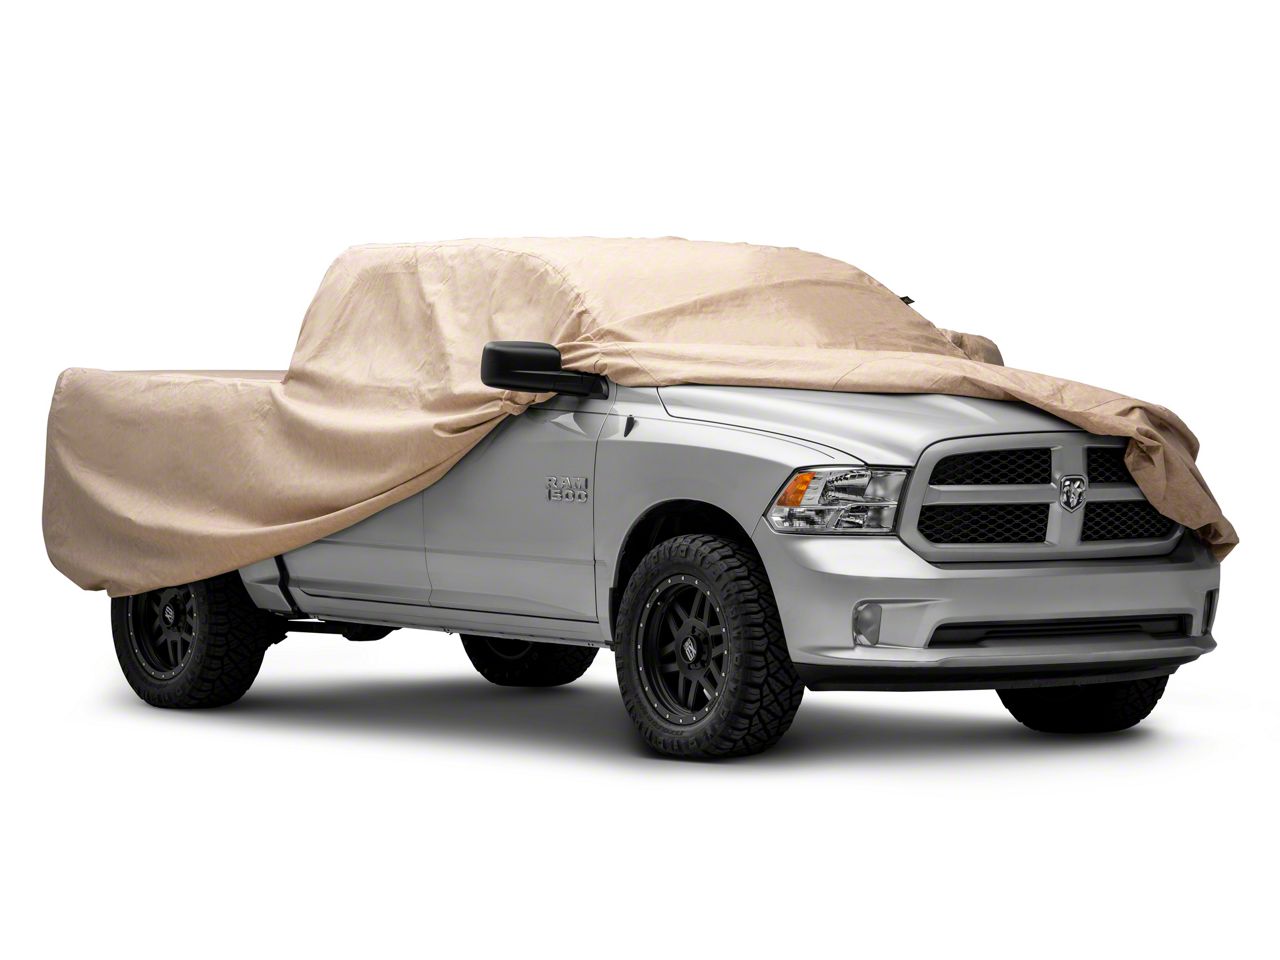 Covercraft 3 Layer Moderate Climate Outdoor Car Cover